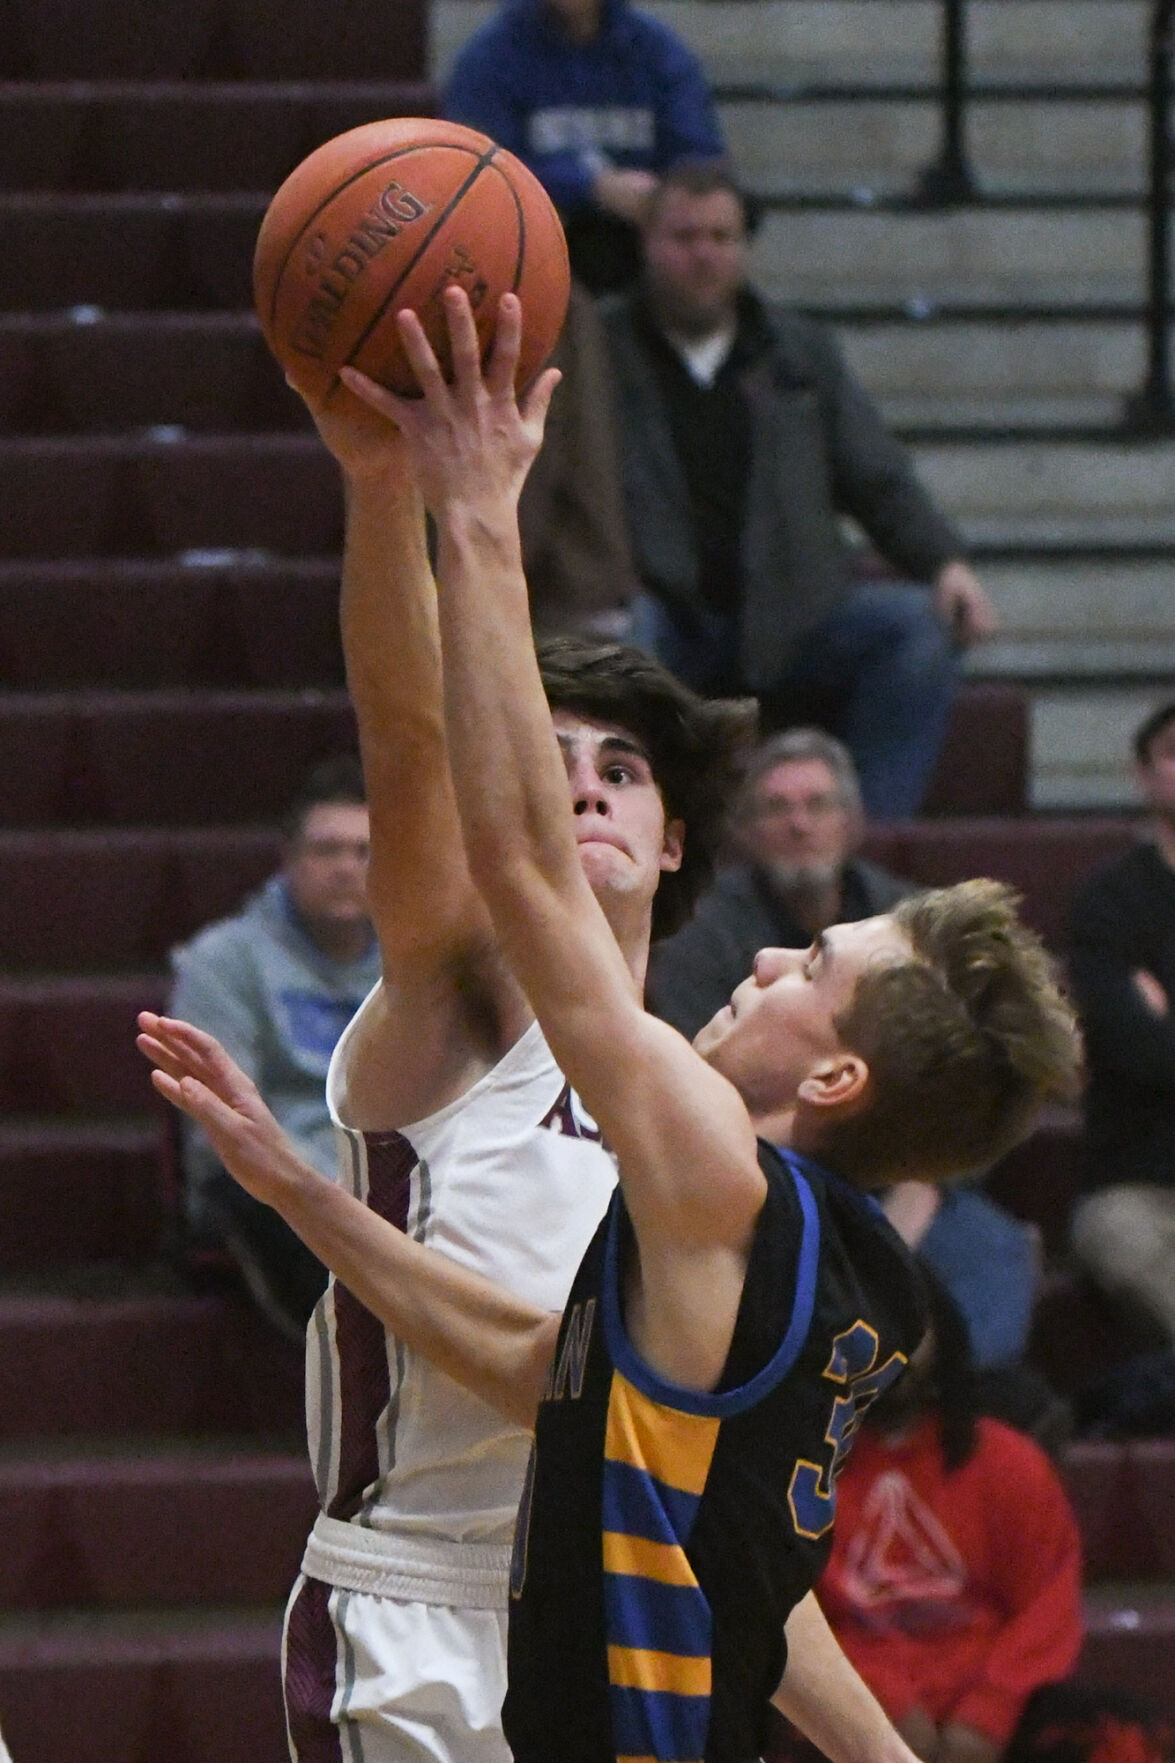 Ashland defeats Morgan County 69-52: Zander Carter leads with 31 points